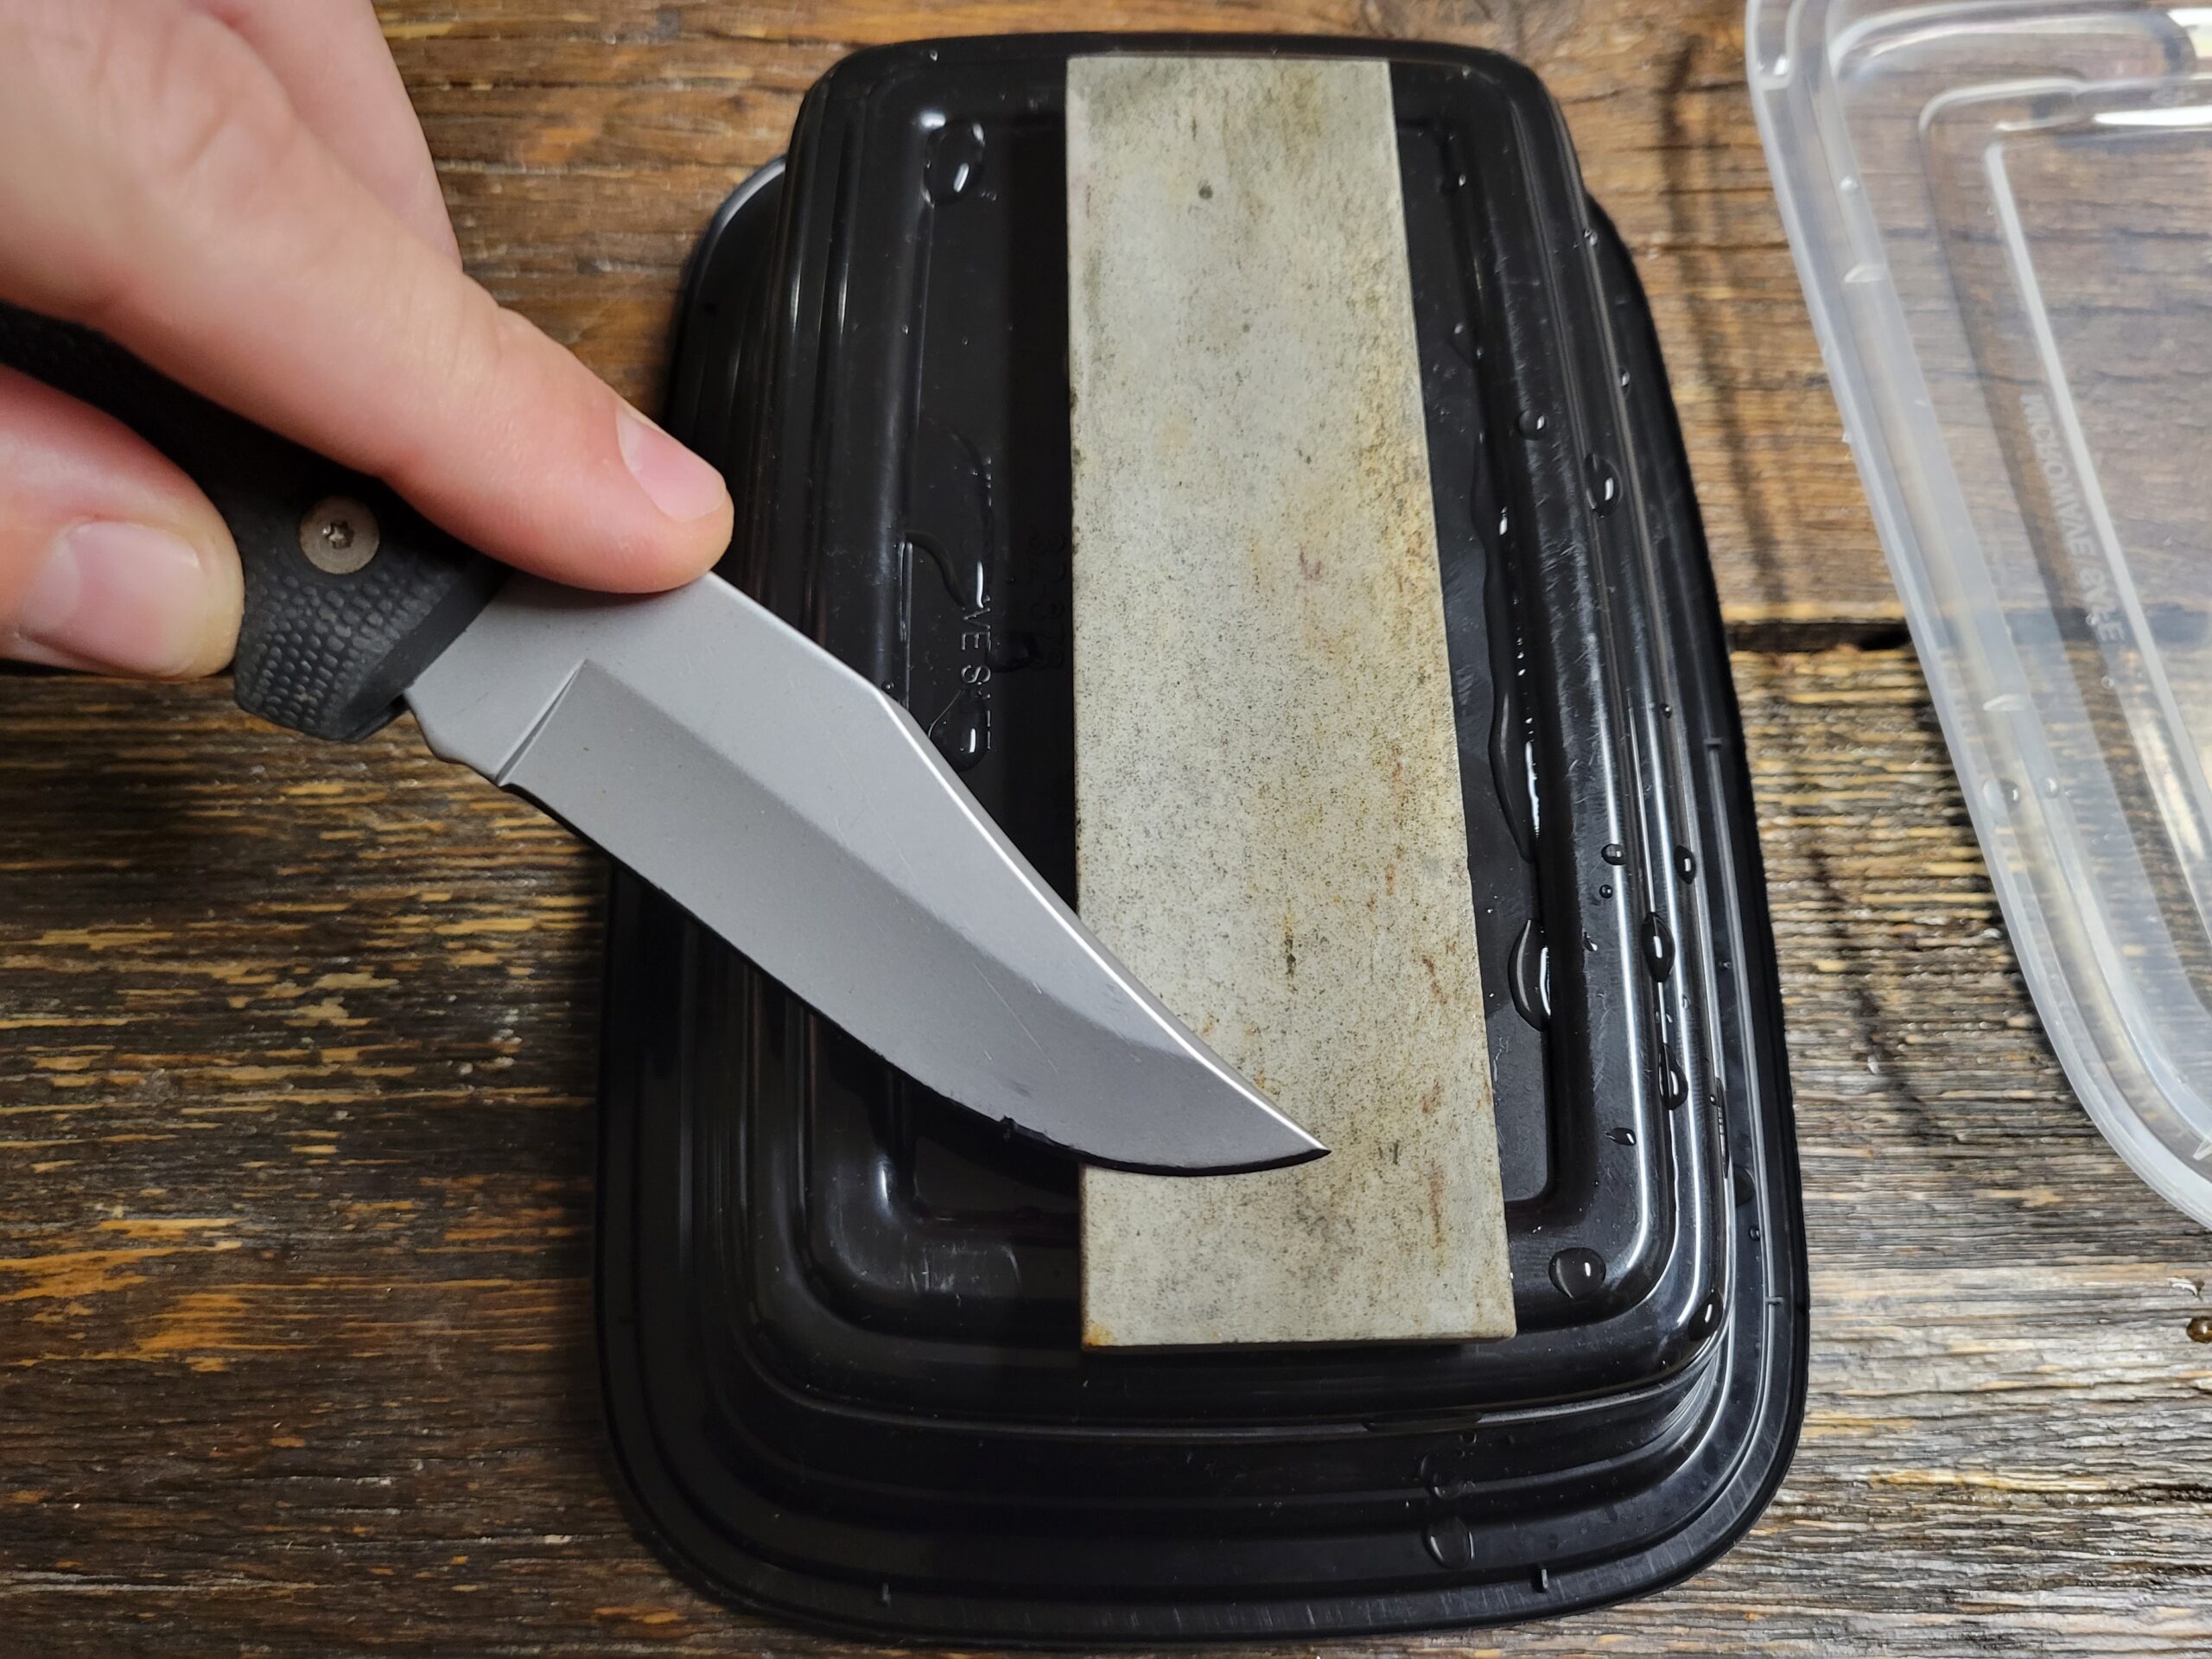  Customer reviews: Tumbler Rolling Knife Sharpener™ - Knife  Sharpening Made Easy - Rolling Knife Sharpening System for Kitchen Knives - Knife  Sharpener Kit Offers 15 & 20 Degree Sharpening